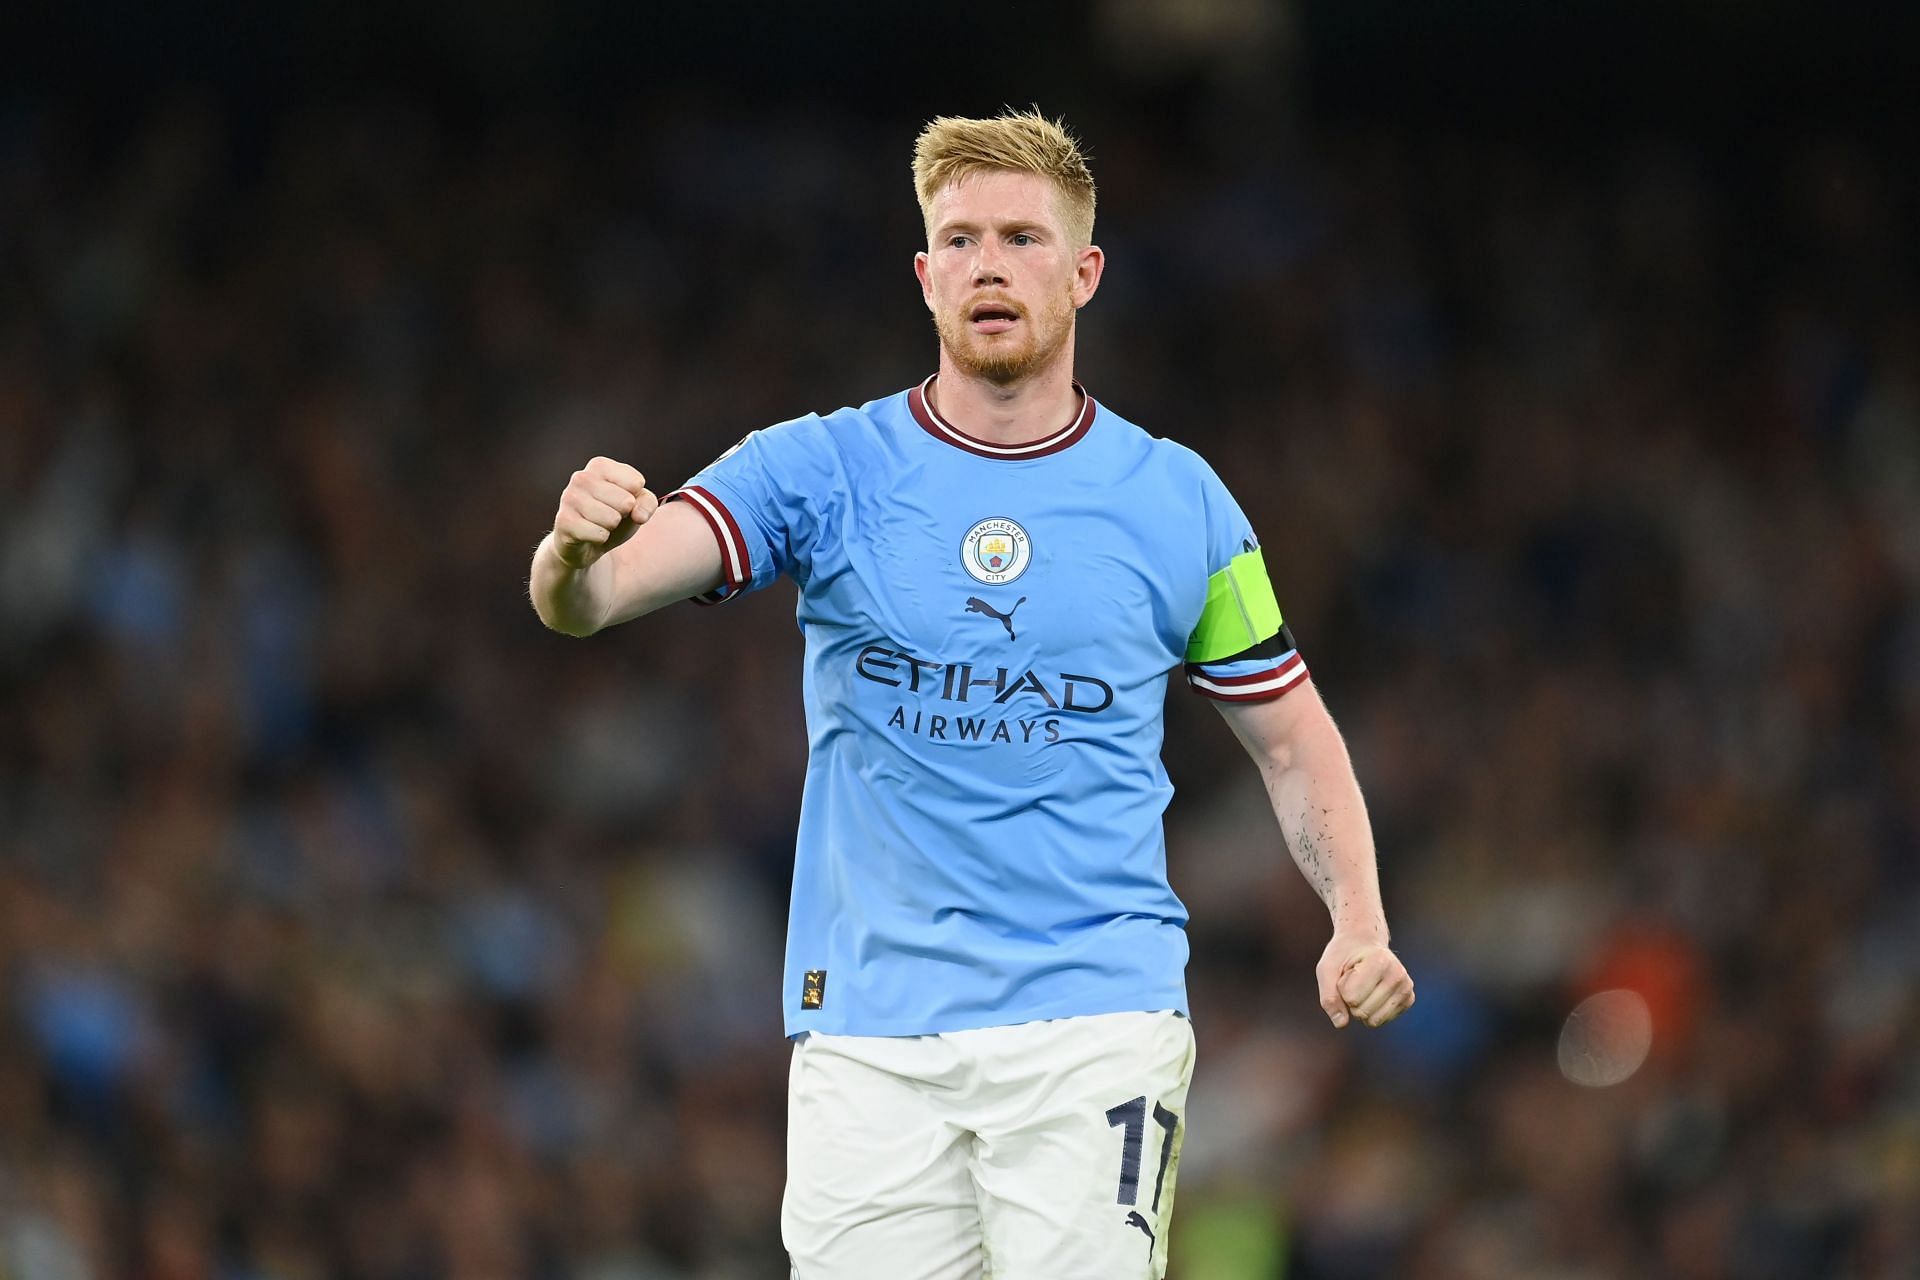 Kevin de Bruyne is already one of the best players in Premier League history